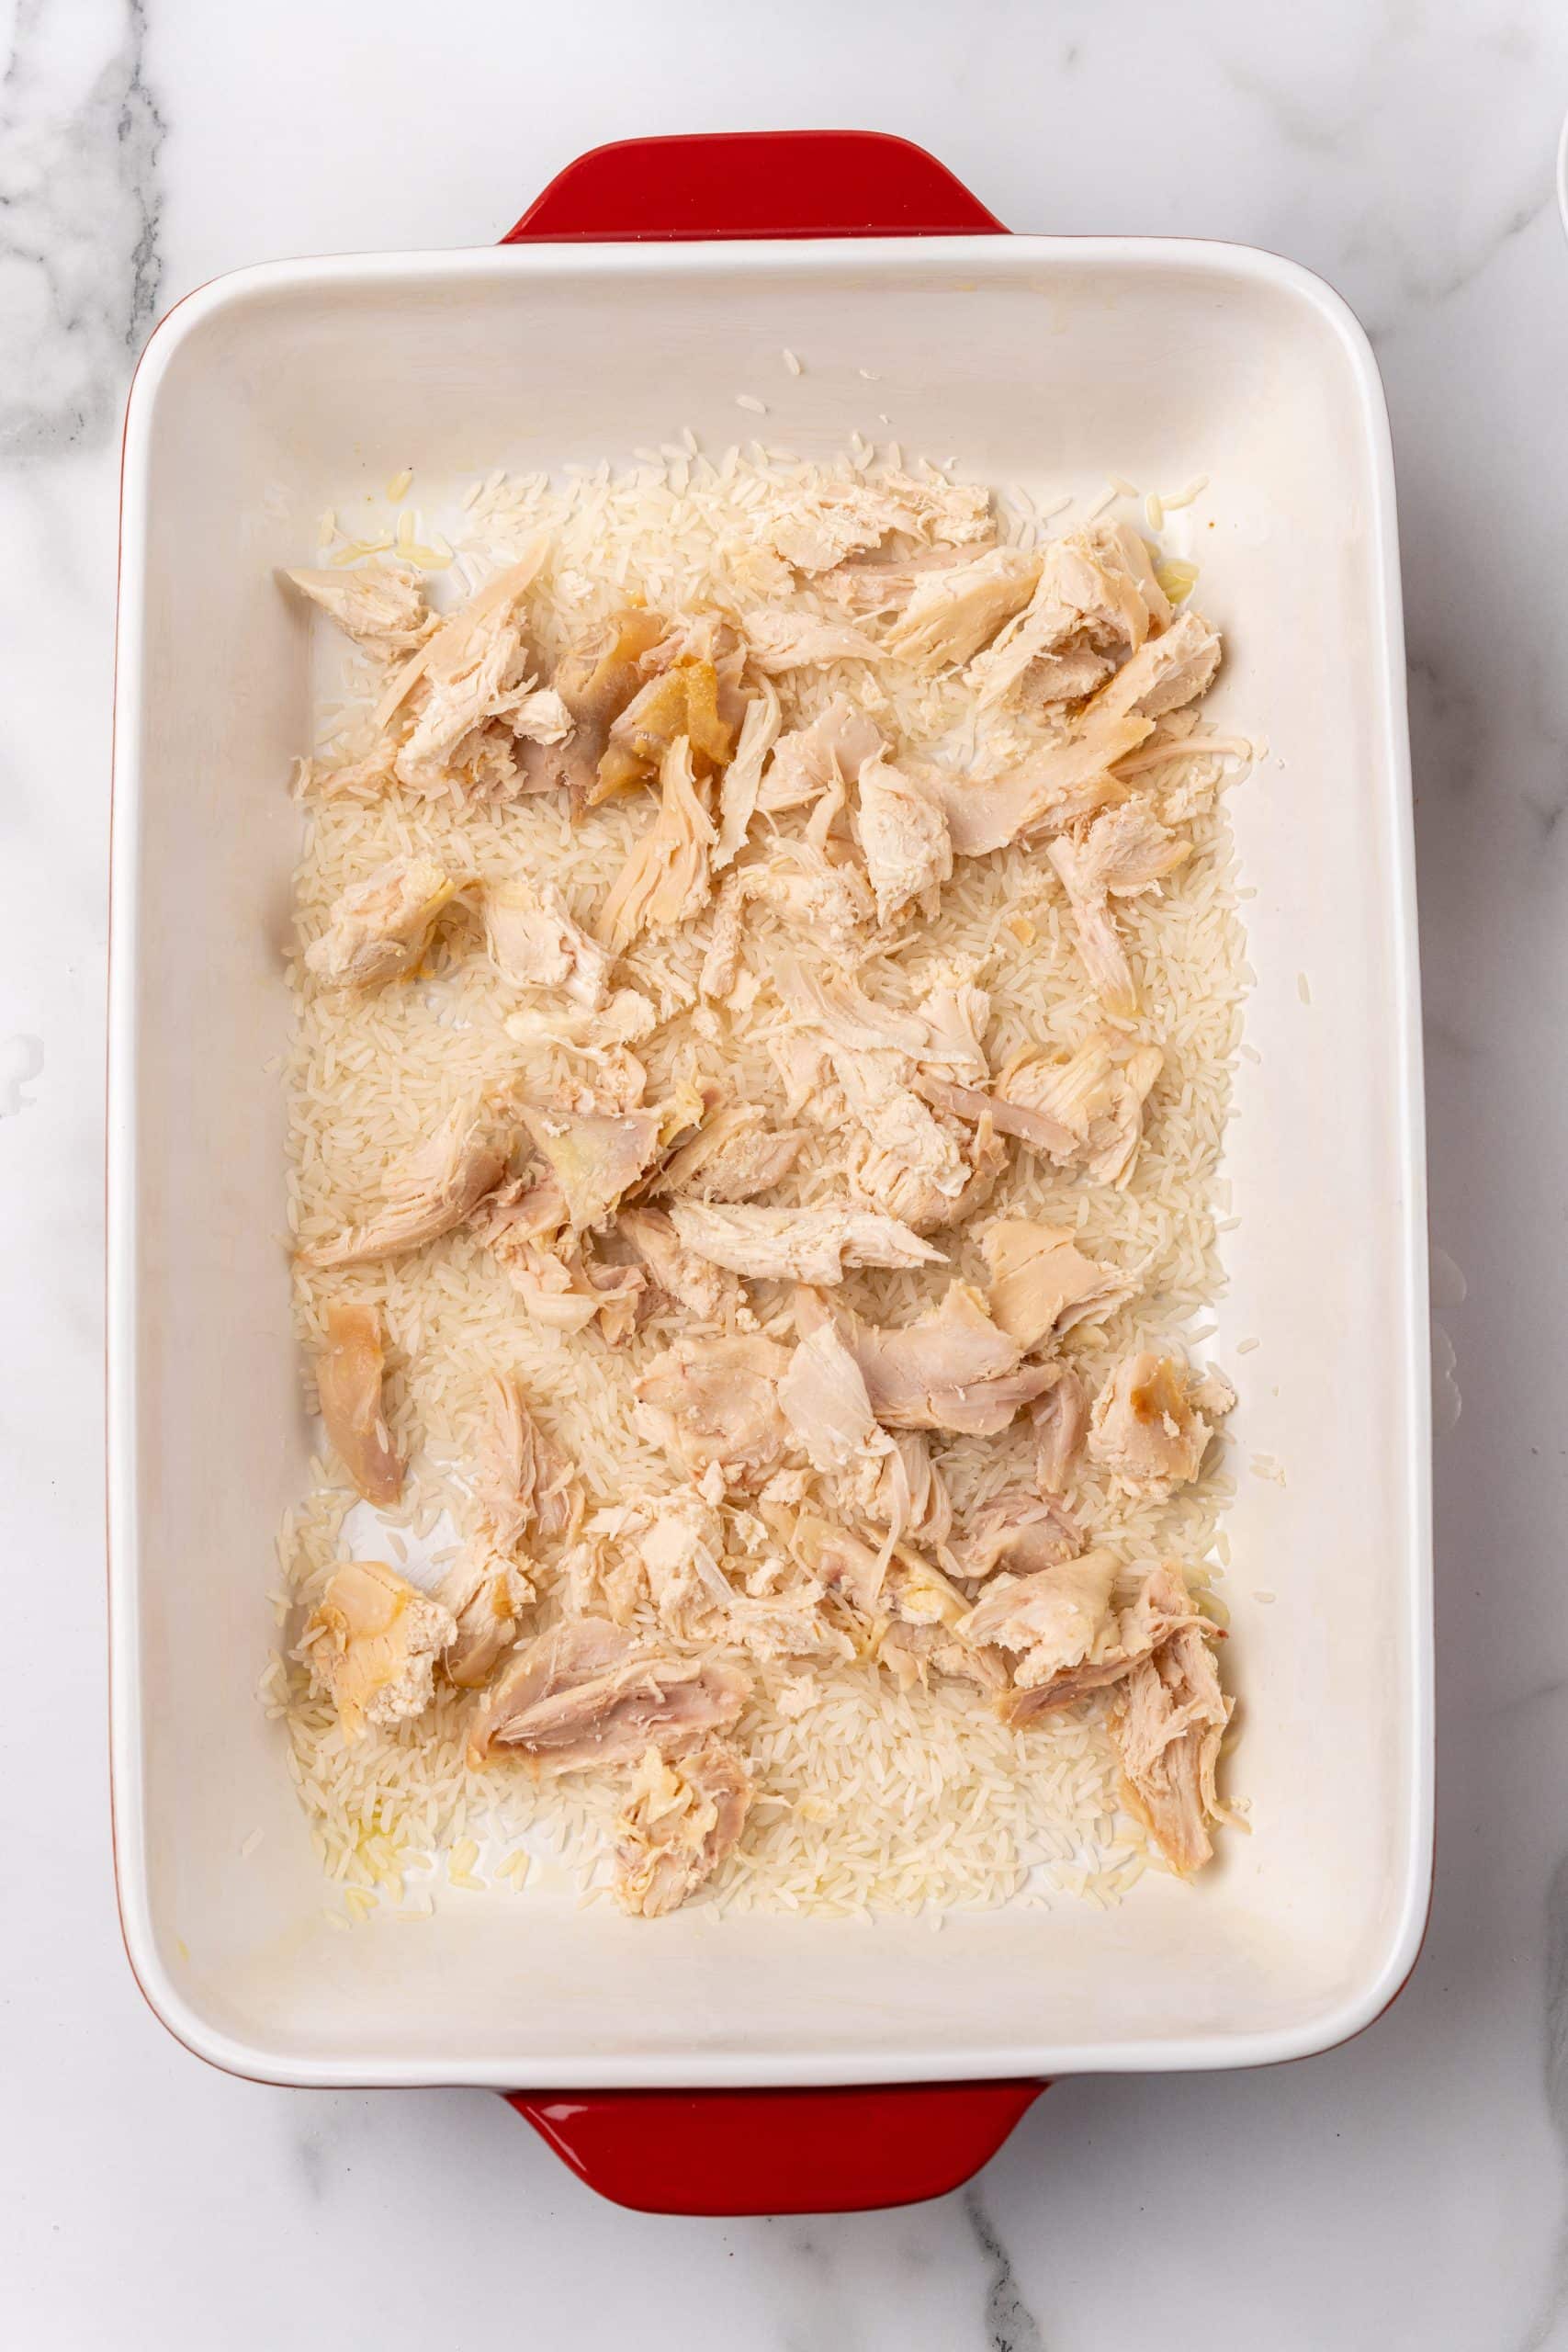 pieces of rotisserie chicken spread over uncooked rice in a large casserole dish